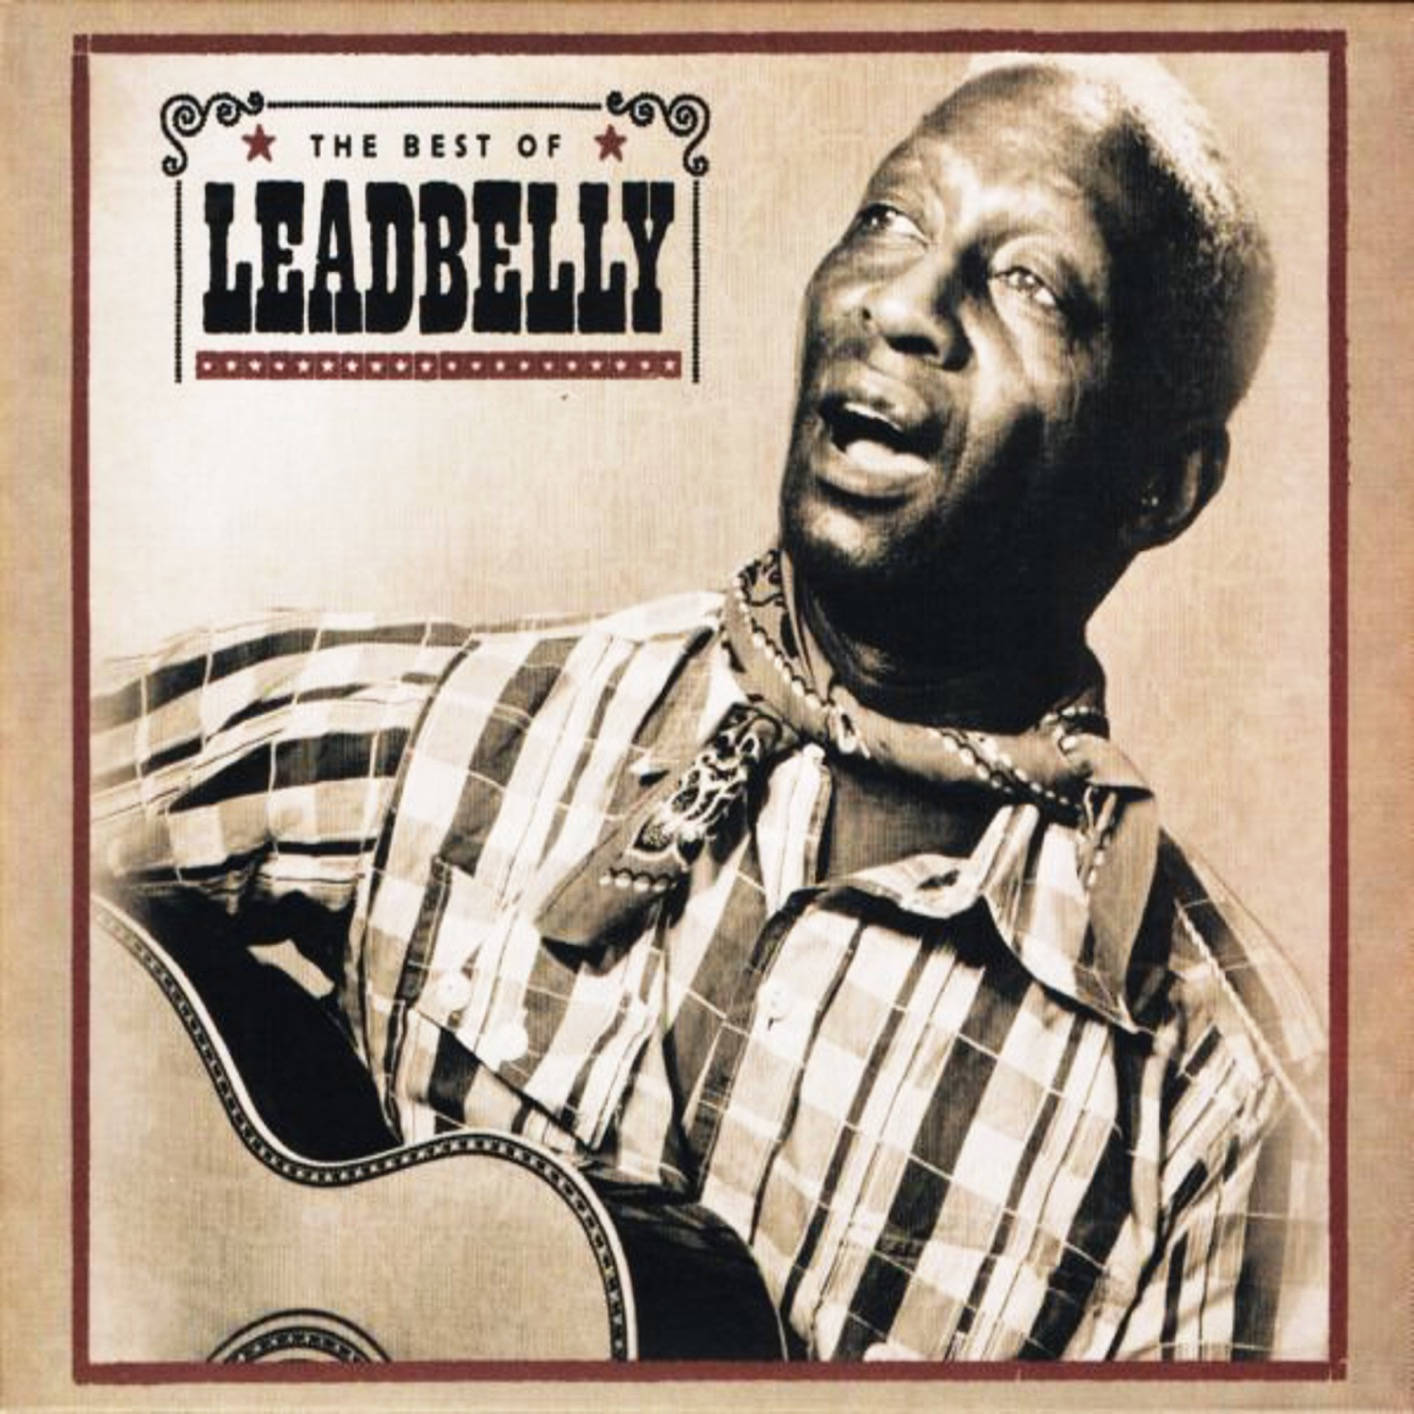 The Best Of Leadbelly Classic Record Album Cover Wallpaper